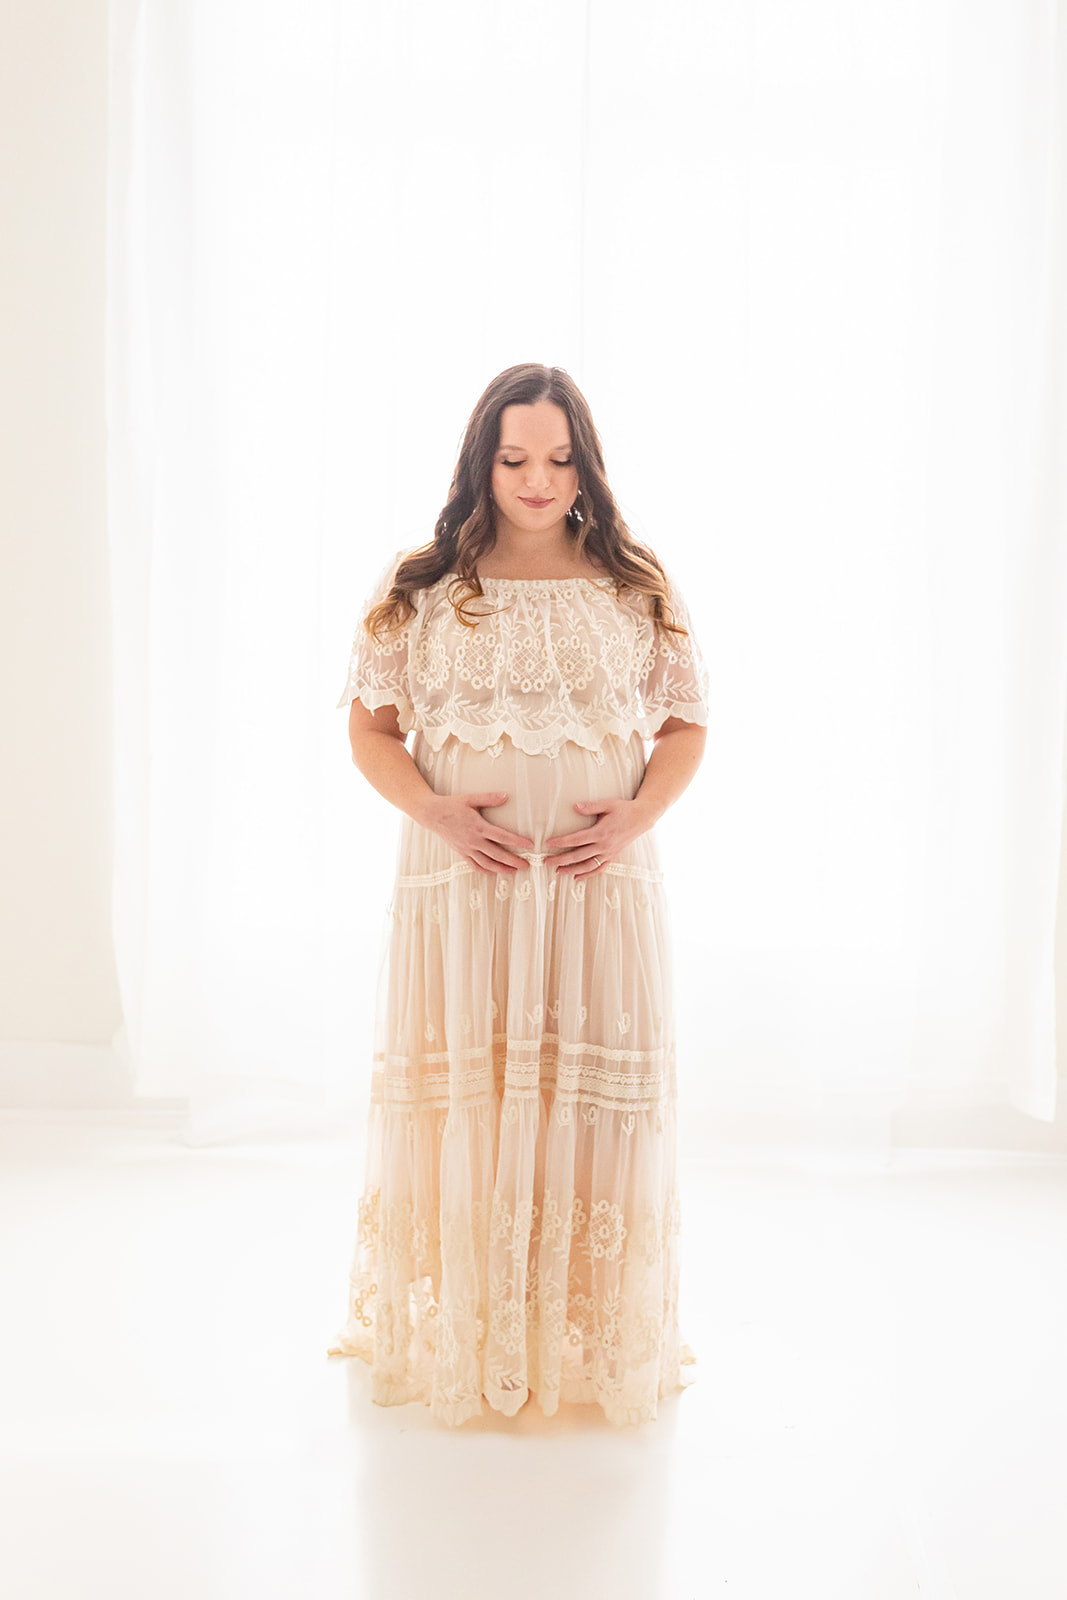 A mom to be smiles down to her bump while standing in a studio in front of a large window